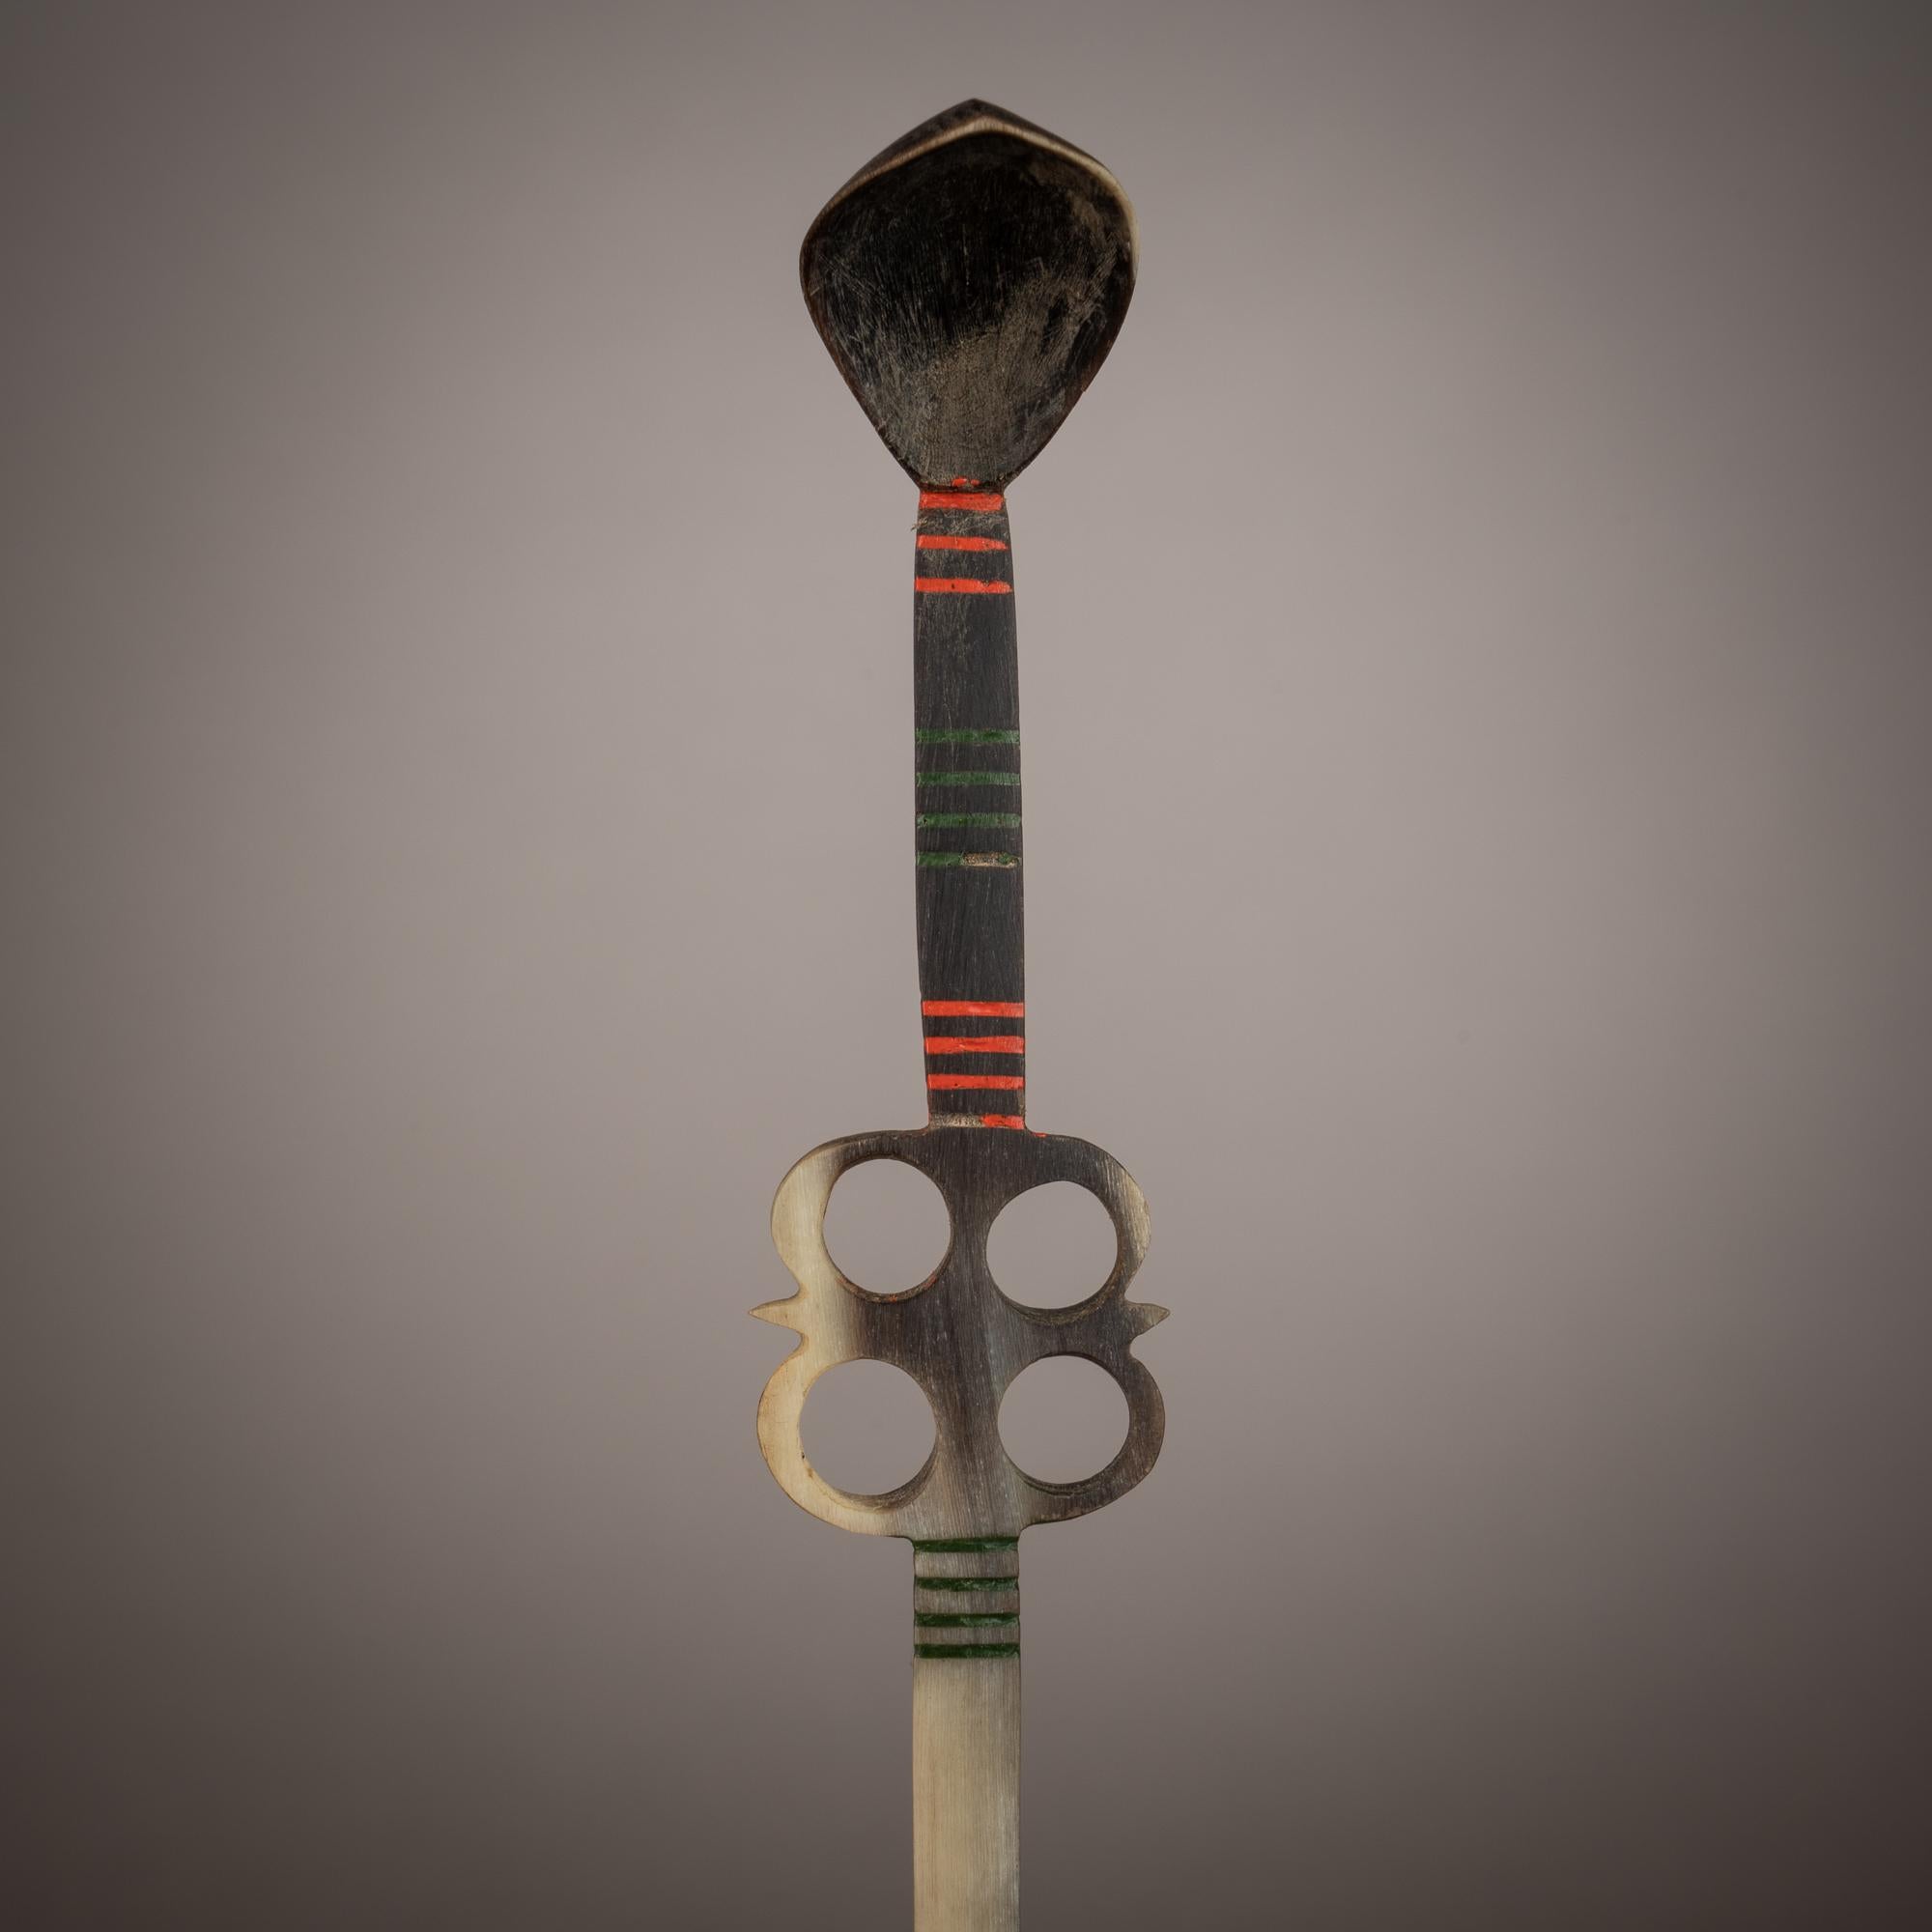 South African artistry, answering the needs of both utility and style, applied its remarkable approach to design in snuff paraphernalia that doubled as eye-catching accessories. These two thin snuff spoons were worn as hairpins, beautifying their